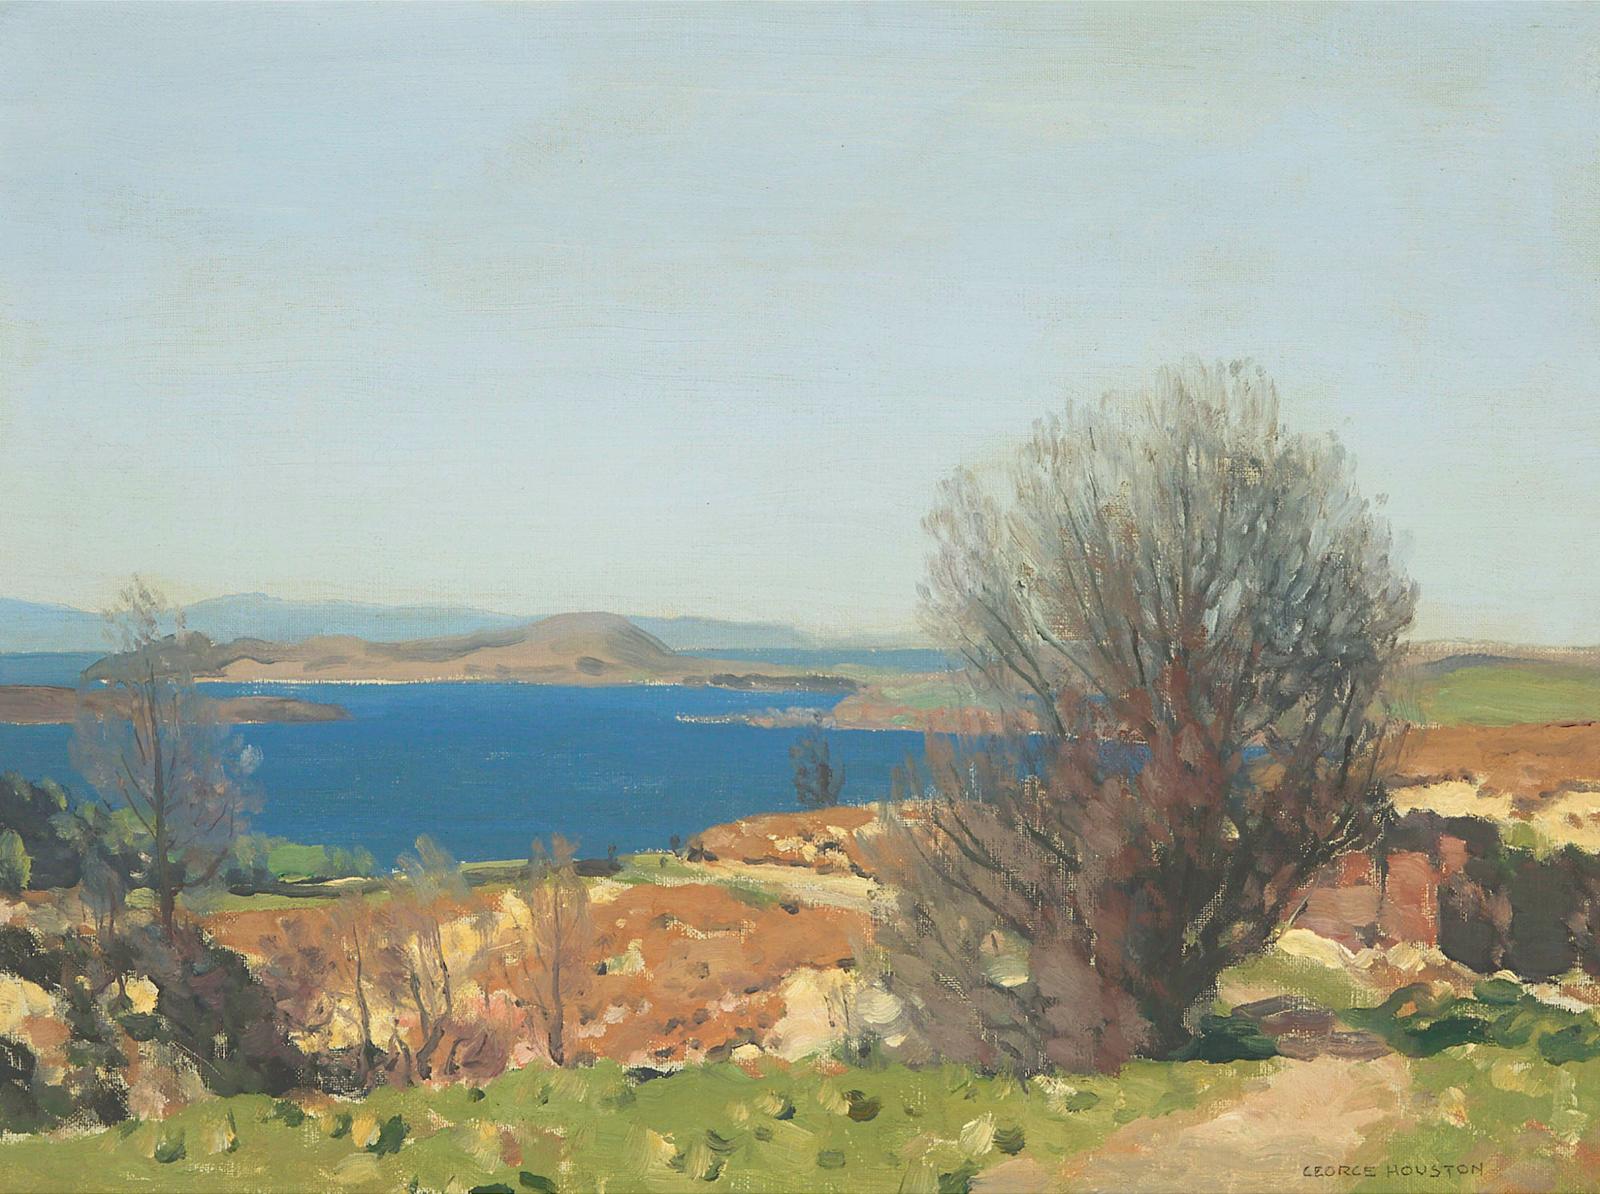 George Houston (1869-1947) - The Clyde From Above Fairlie